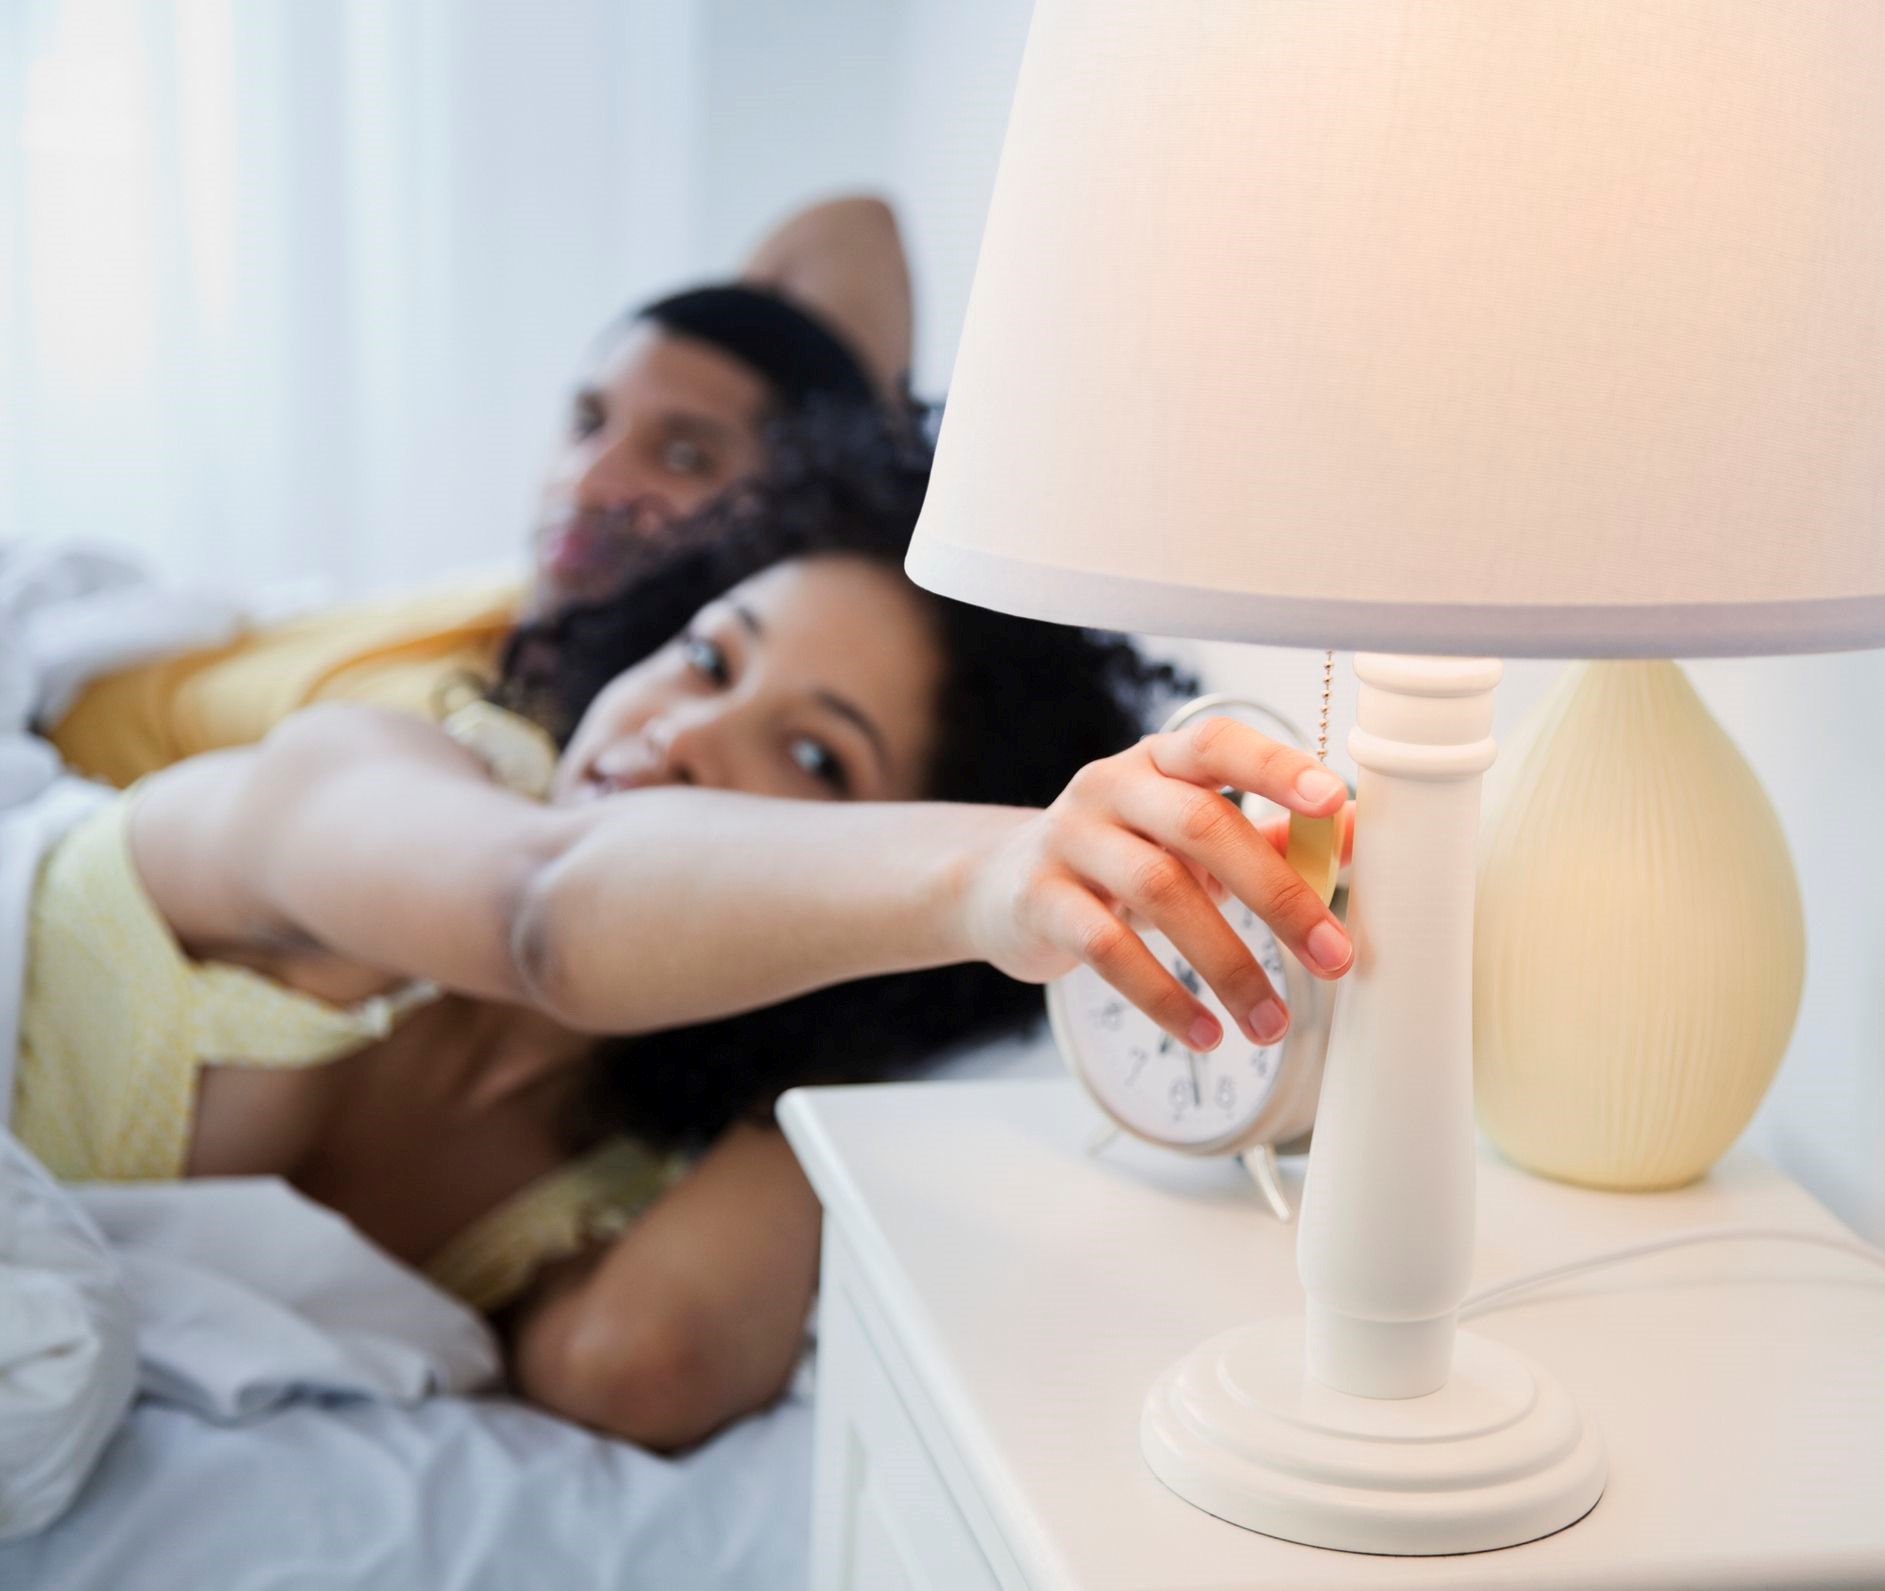 Nightstand accessories to help your sleep routine